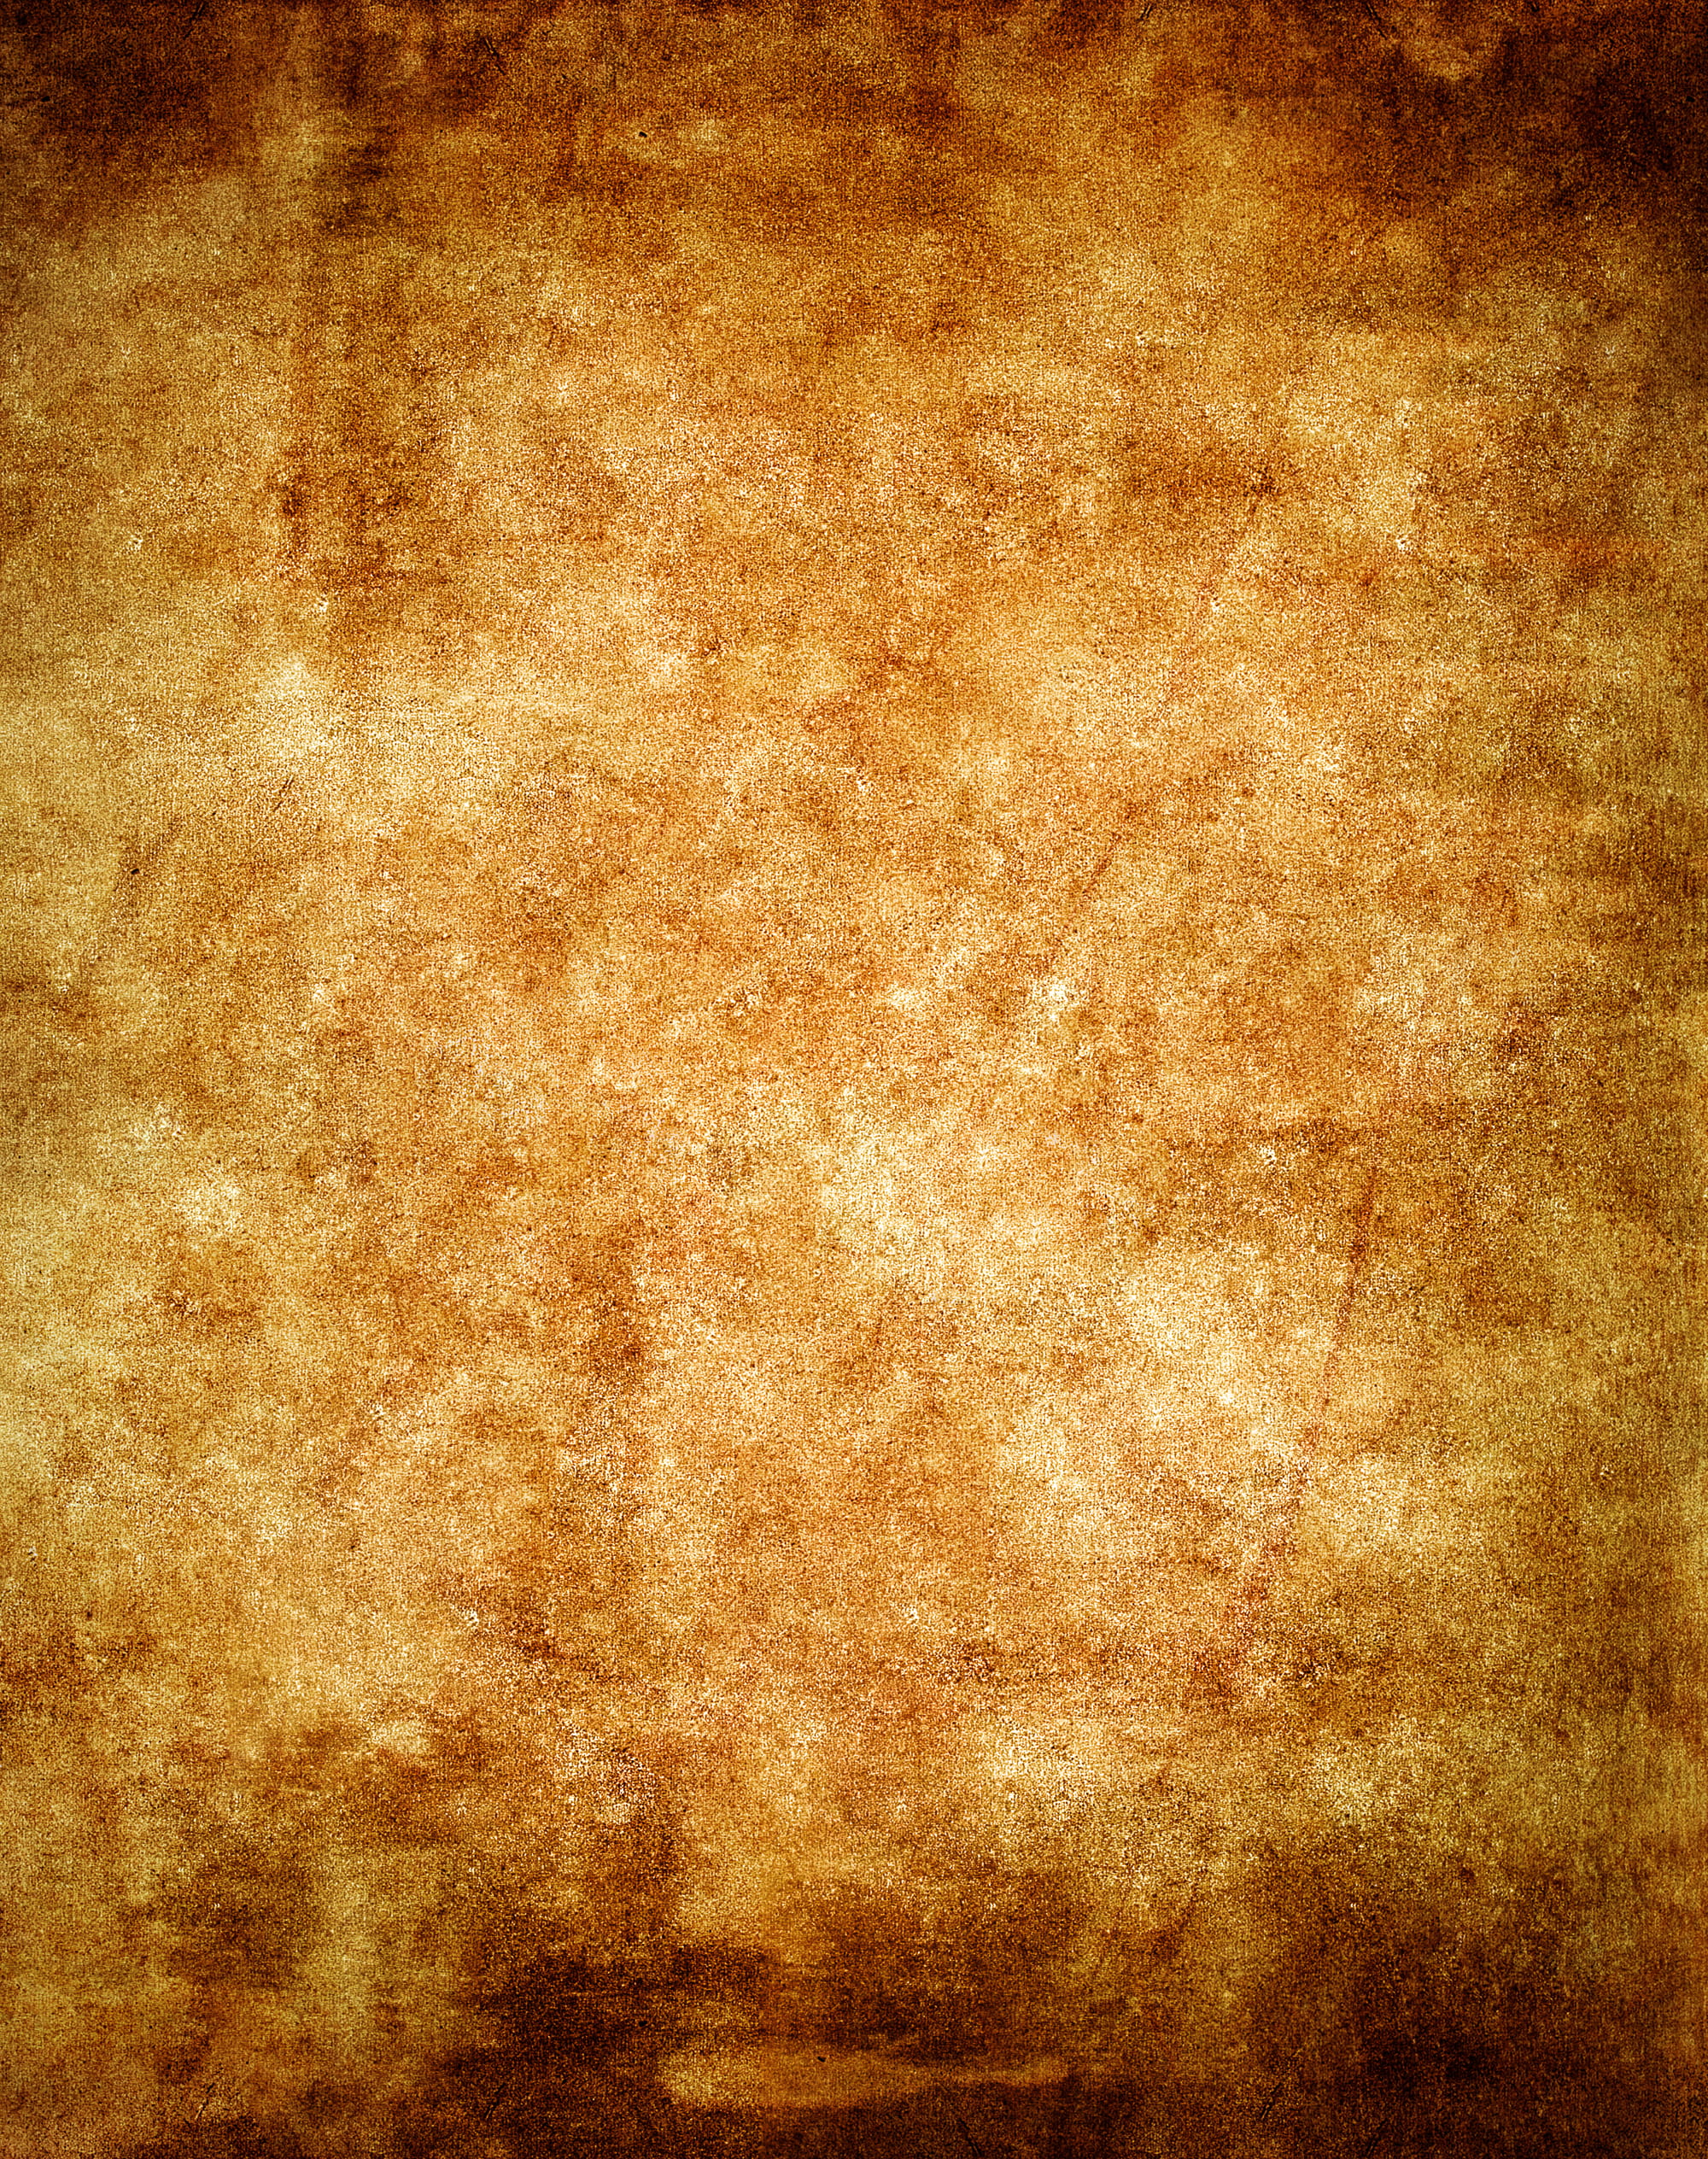 Burnt Paper Border, textured, abstract backgrounds, color, dirt